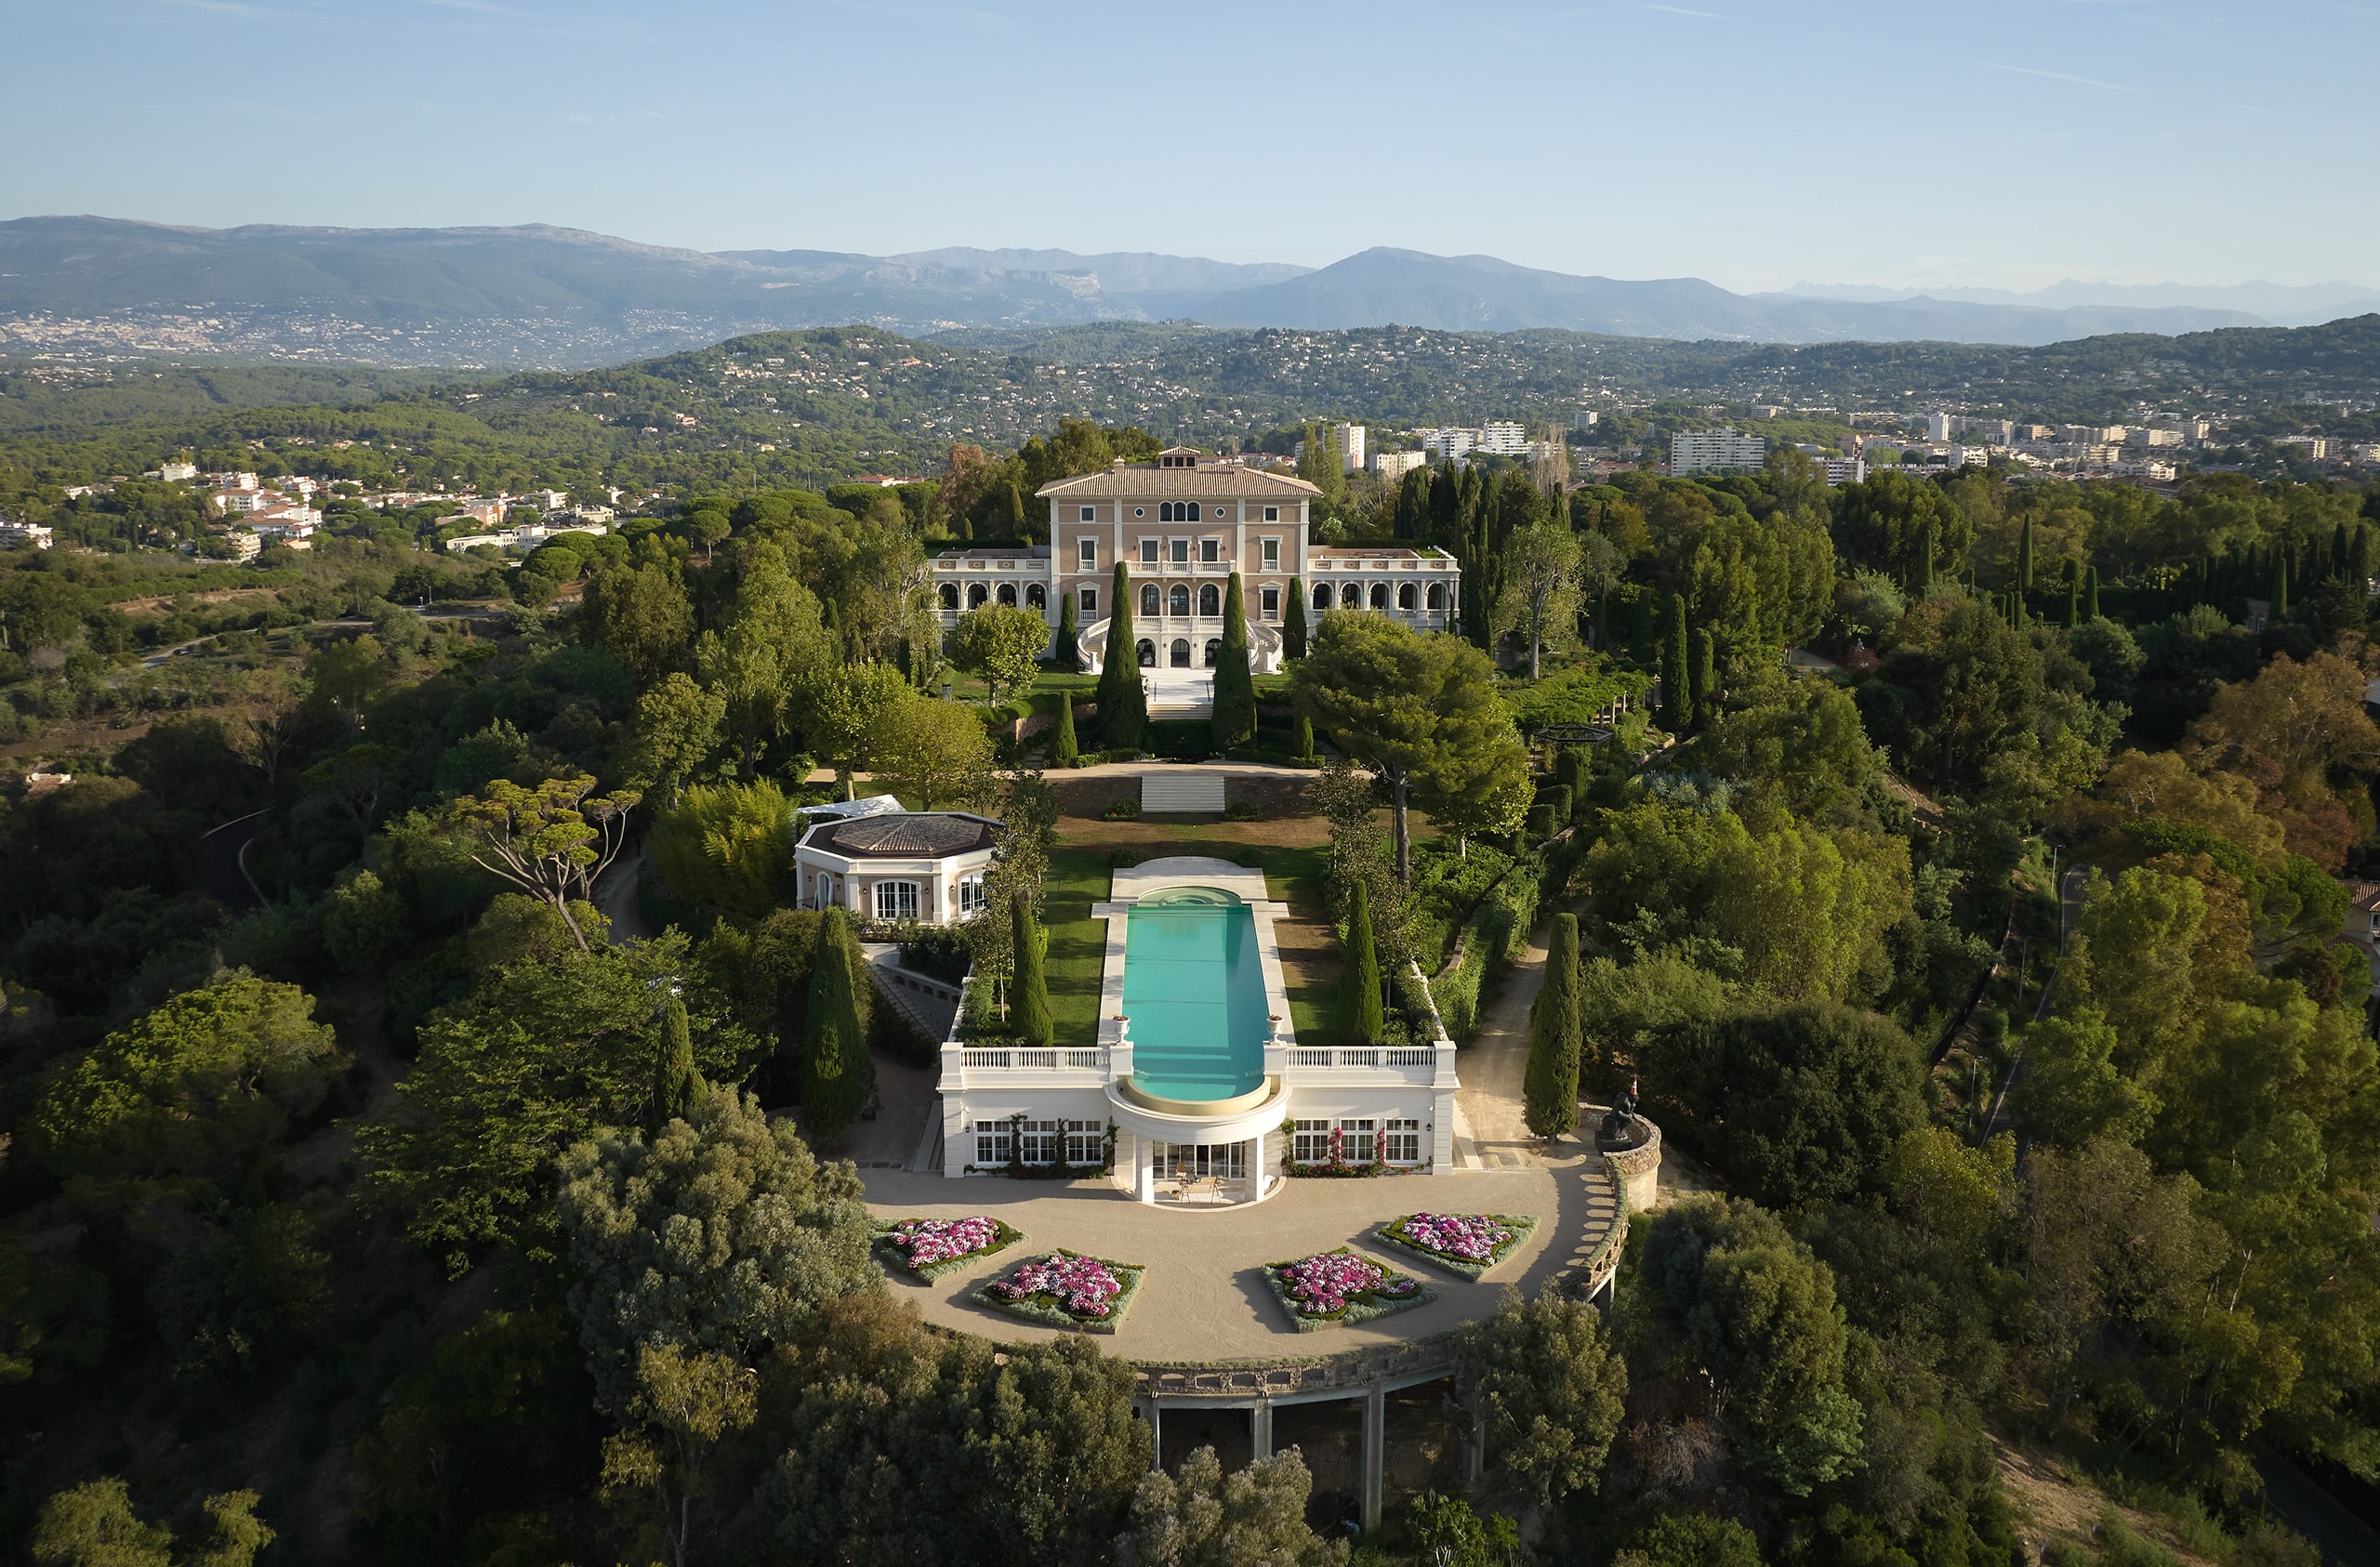 Cannes Chateau as seen from above